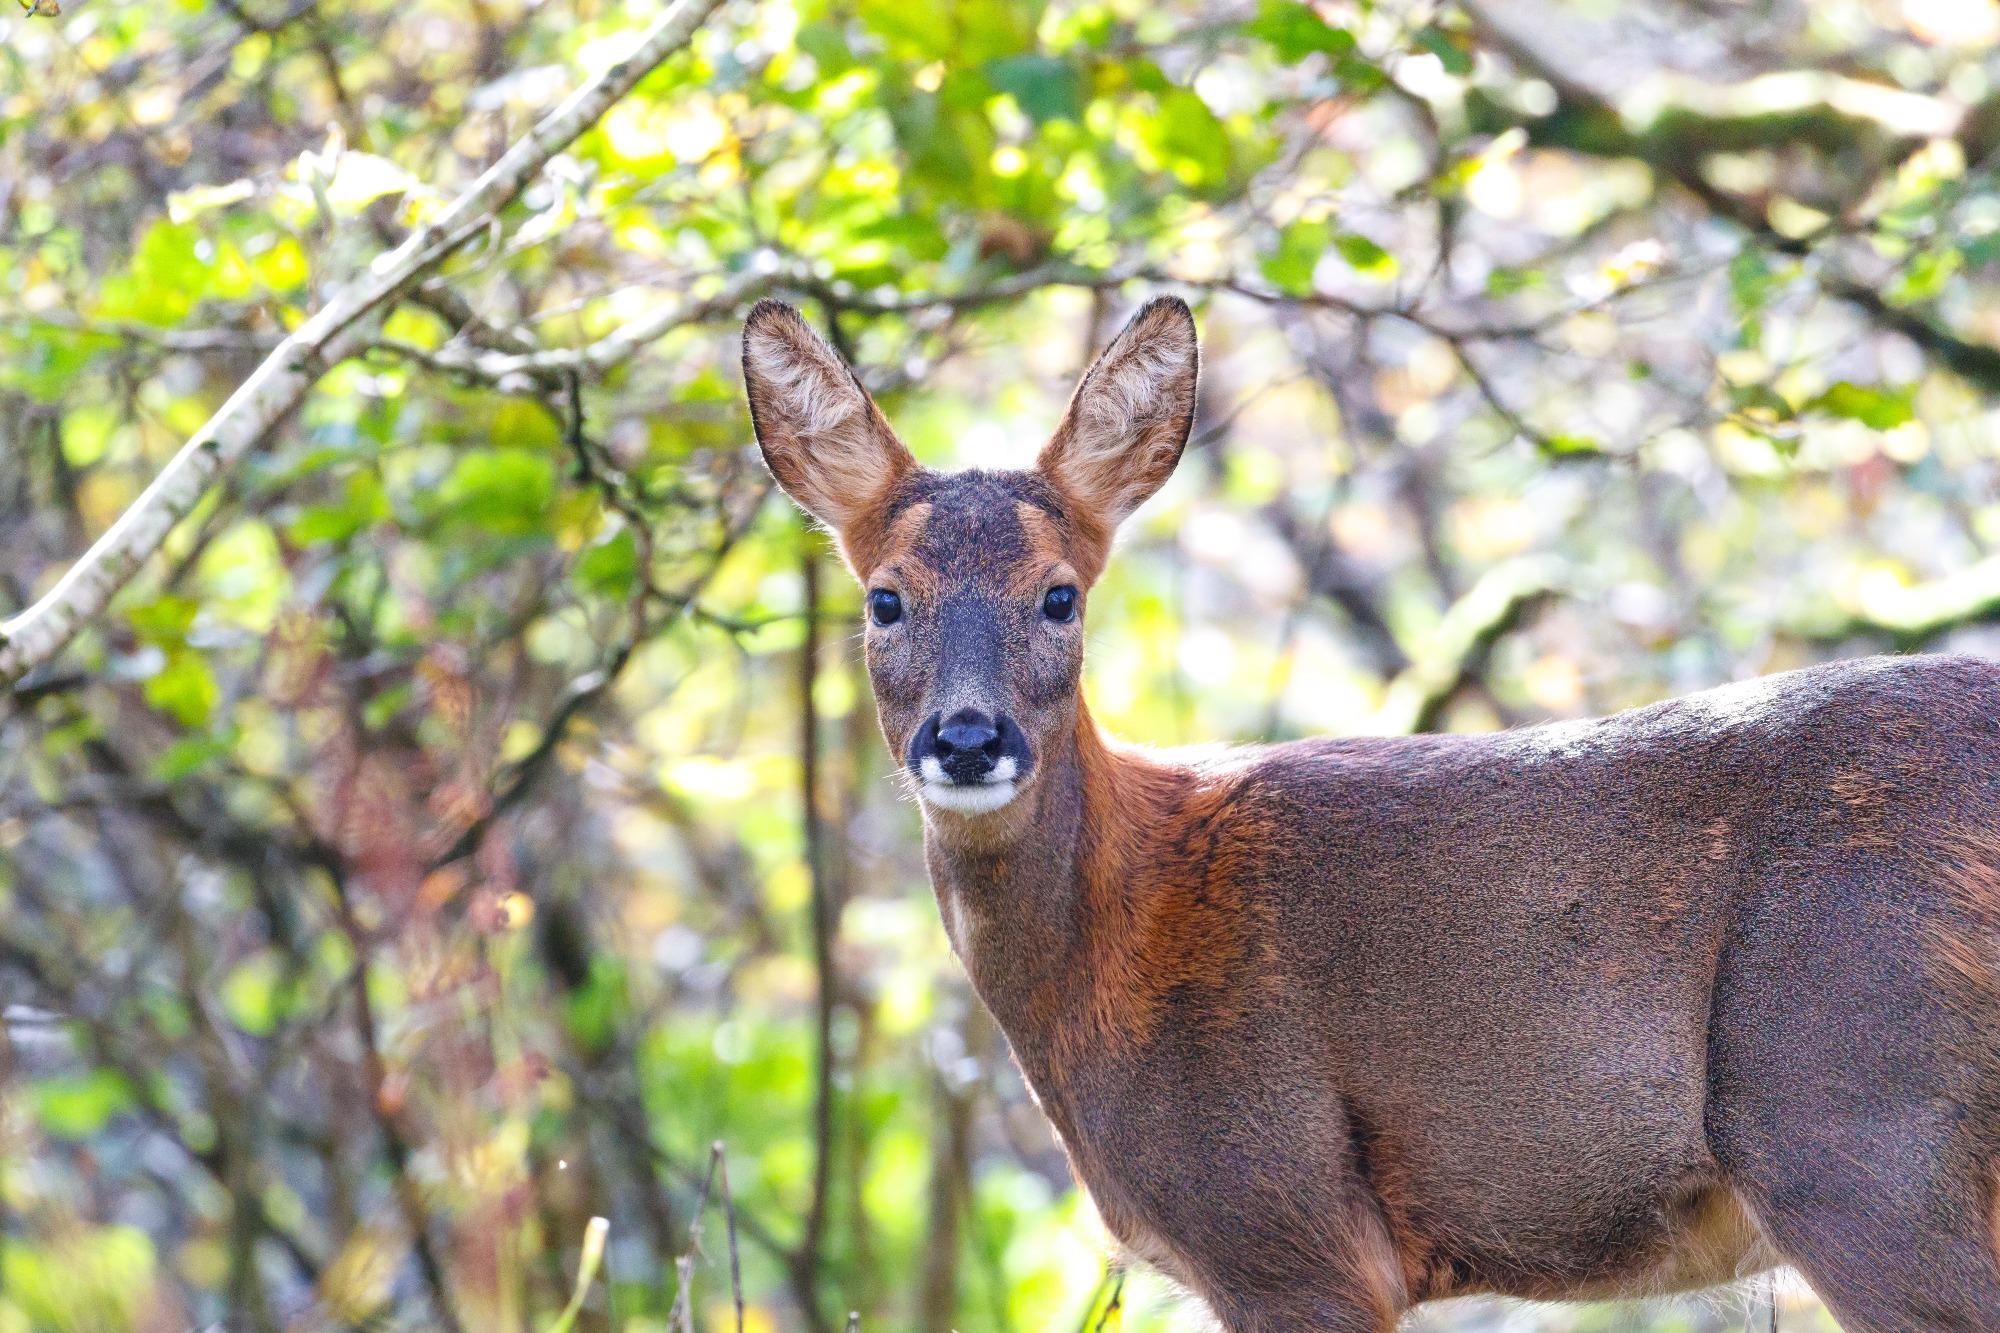 Study: Screening of wild deer populations for exposure to SARS-CoV-2 in the United Kingdom, 2020-2021. Image Credit: Mark Cane / Shutterstock